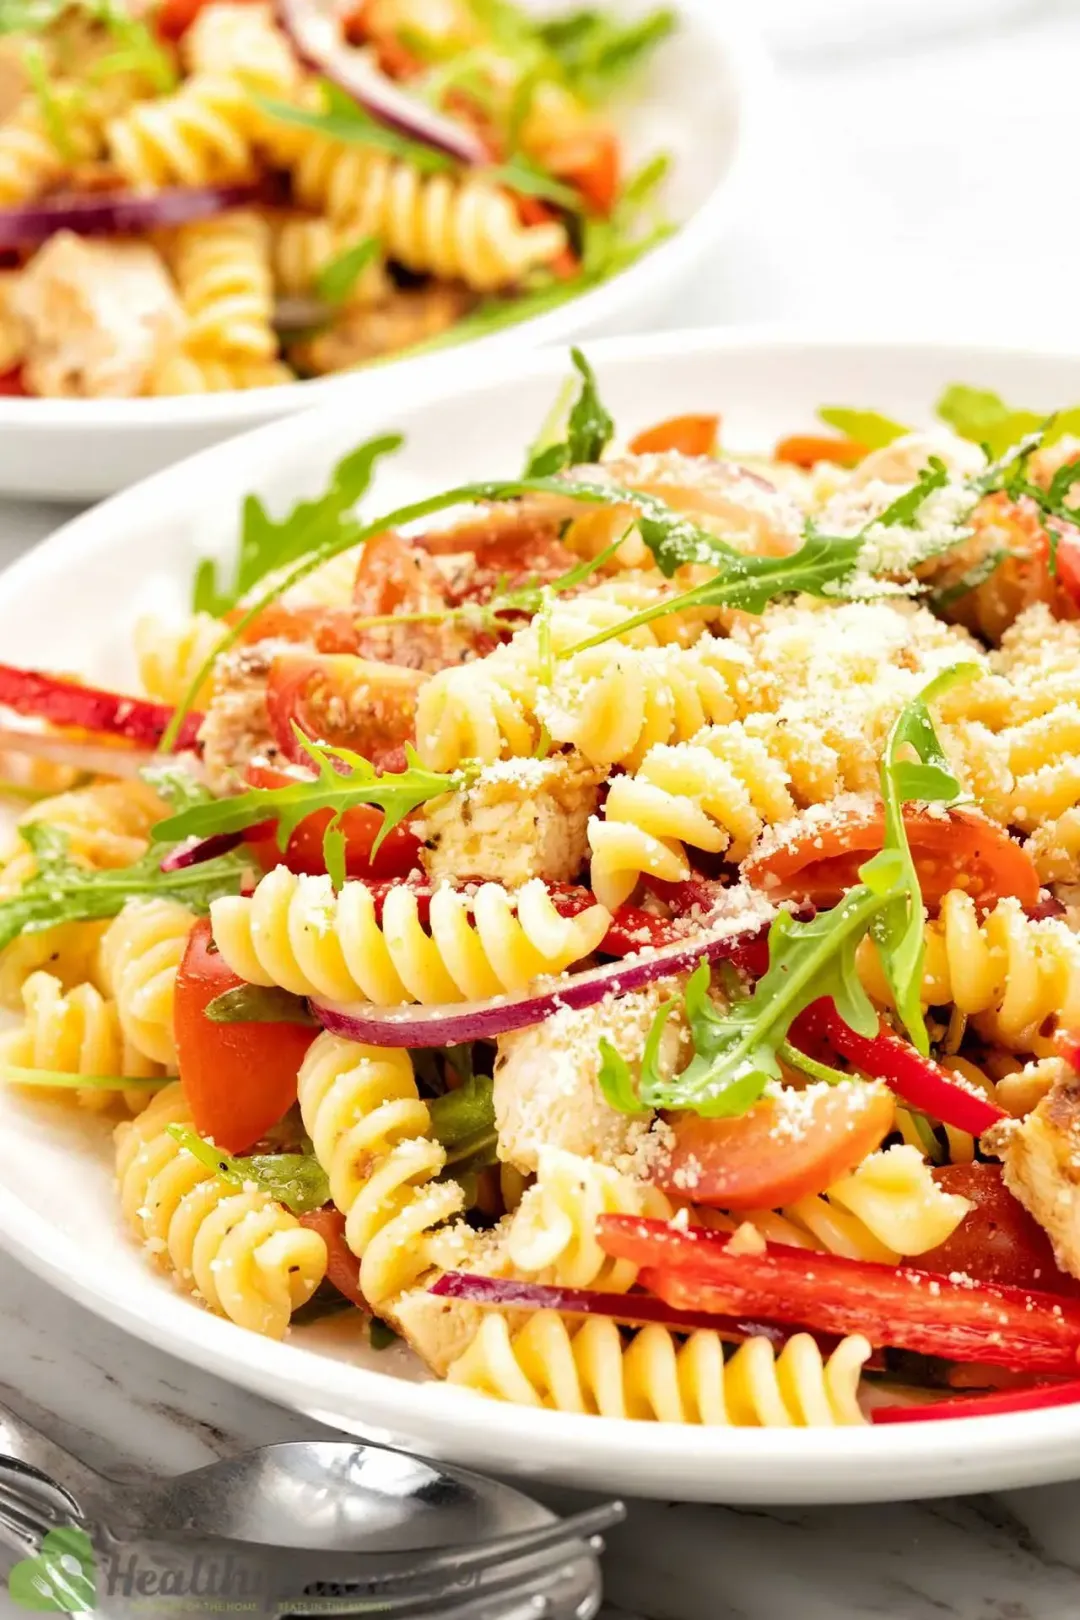 Chicken Pasta Salad Recipe - For A Light, Herby, And Tasty Salad